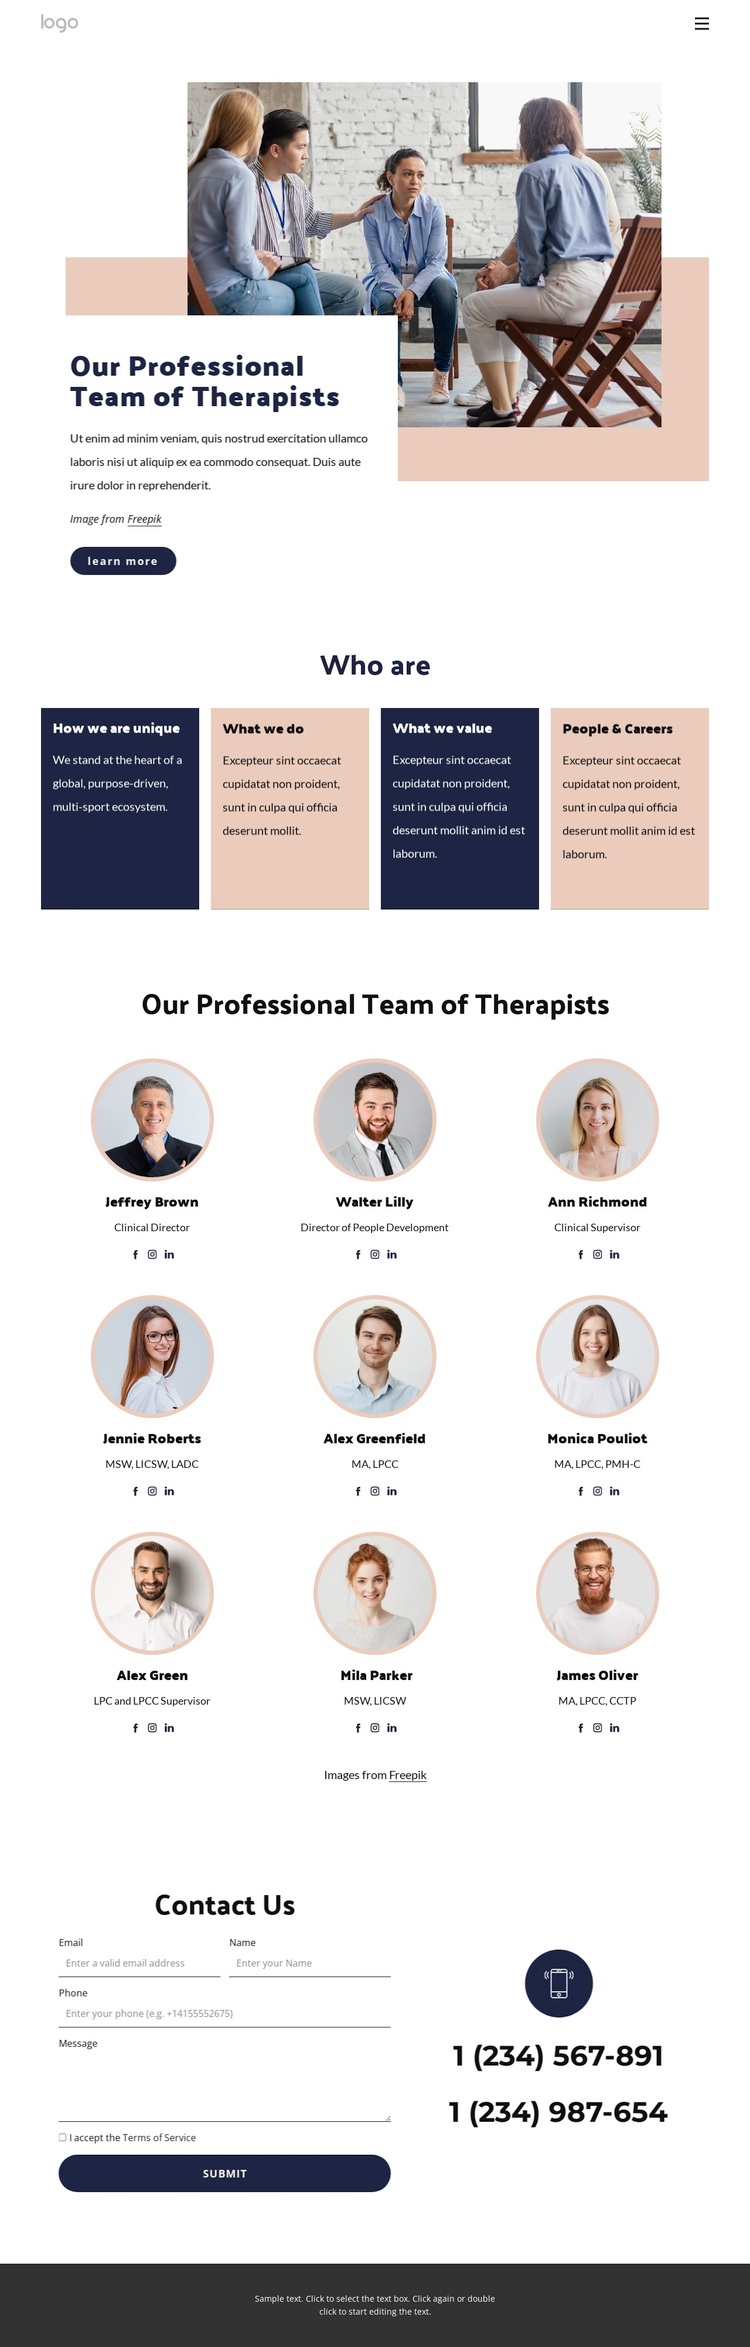 Our professional team of therapists Template